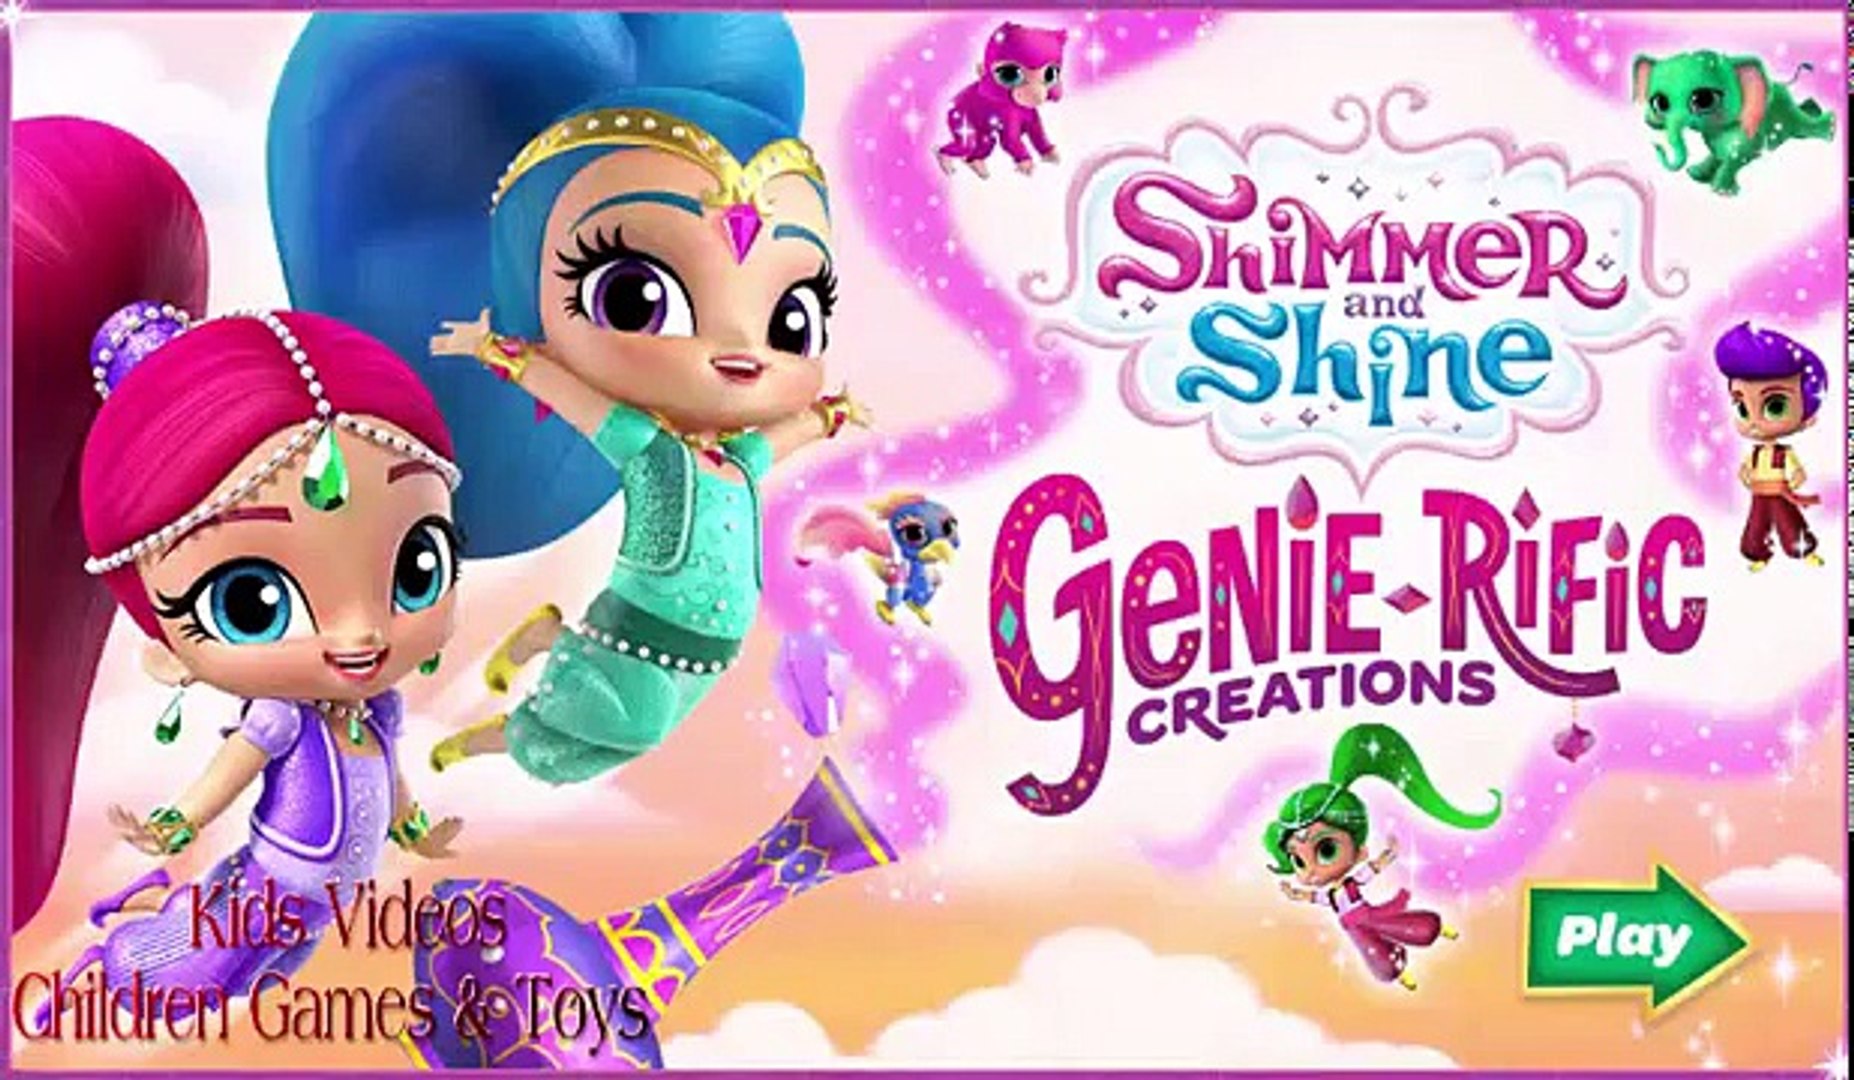 New Nickelodeon - Genie-rific Creations | Shimmer and Shine Episode on Nick  Jr. Games For Kids - video Dailymotion